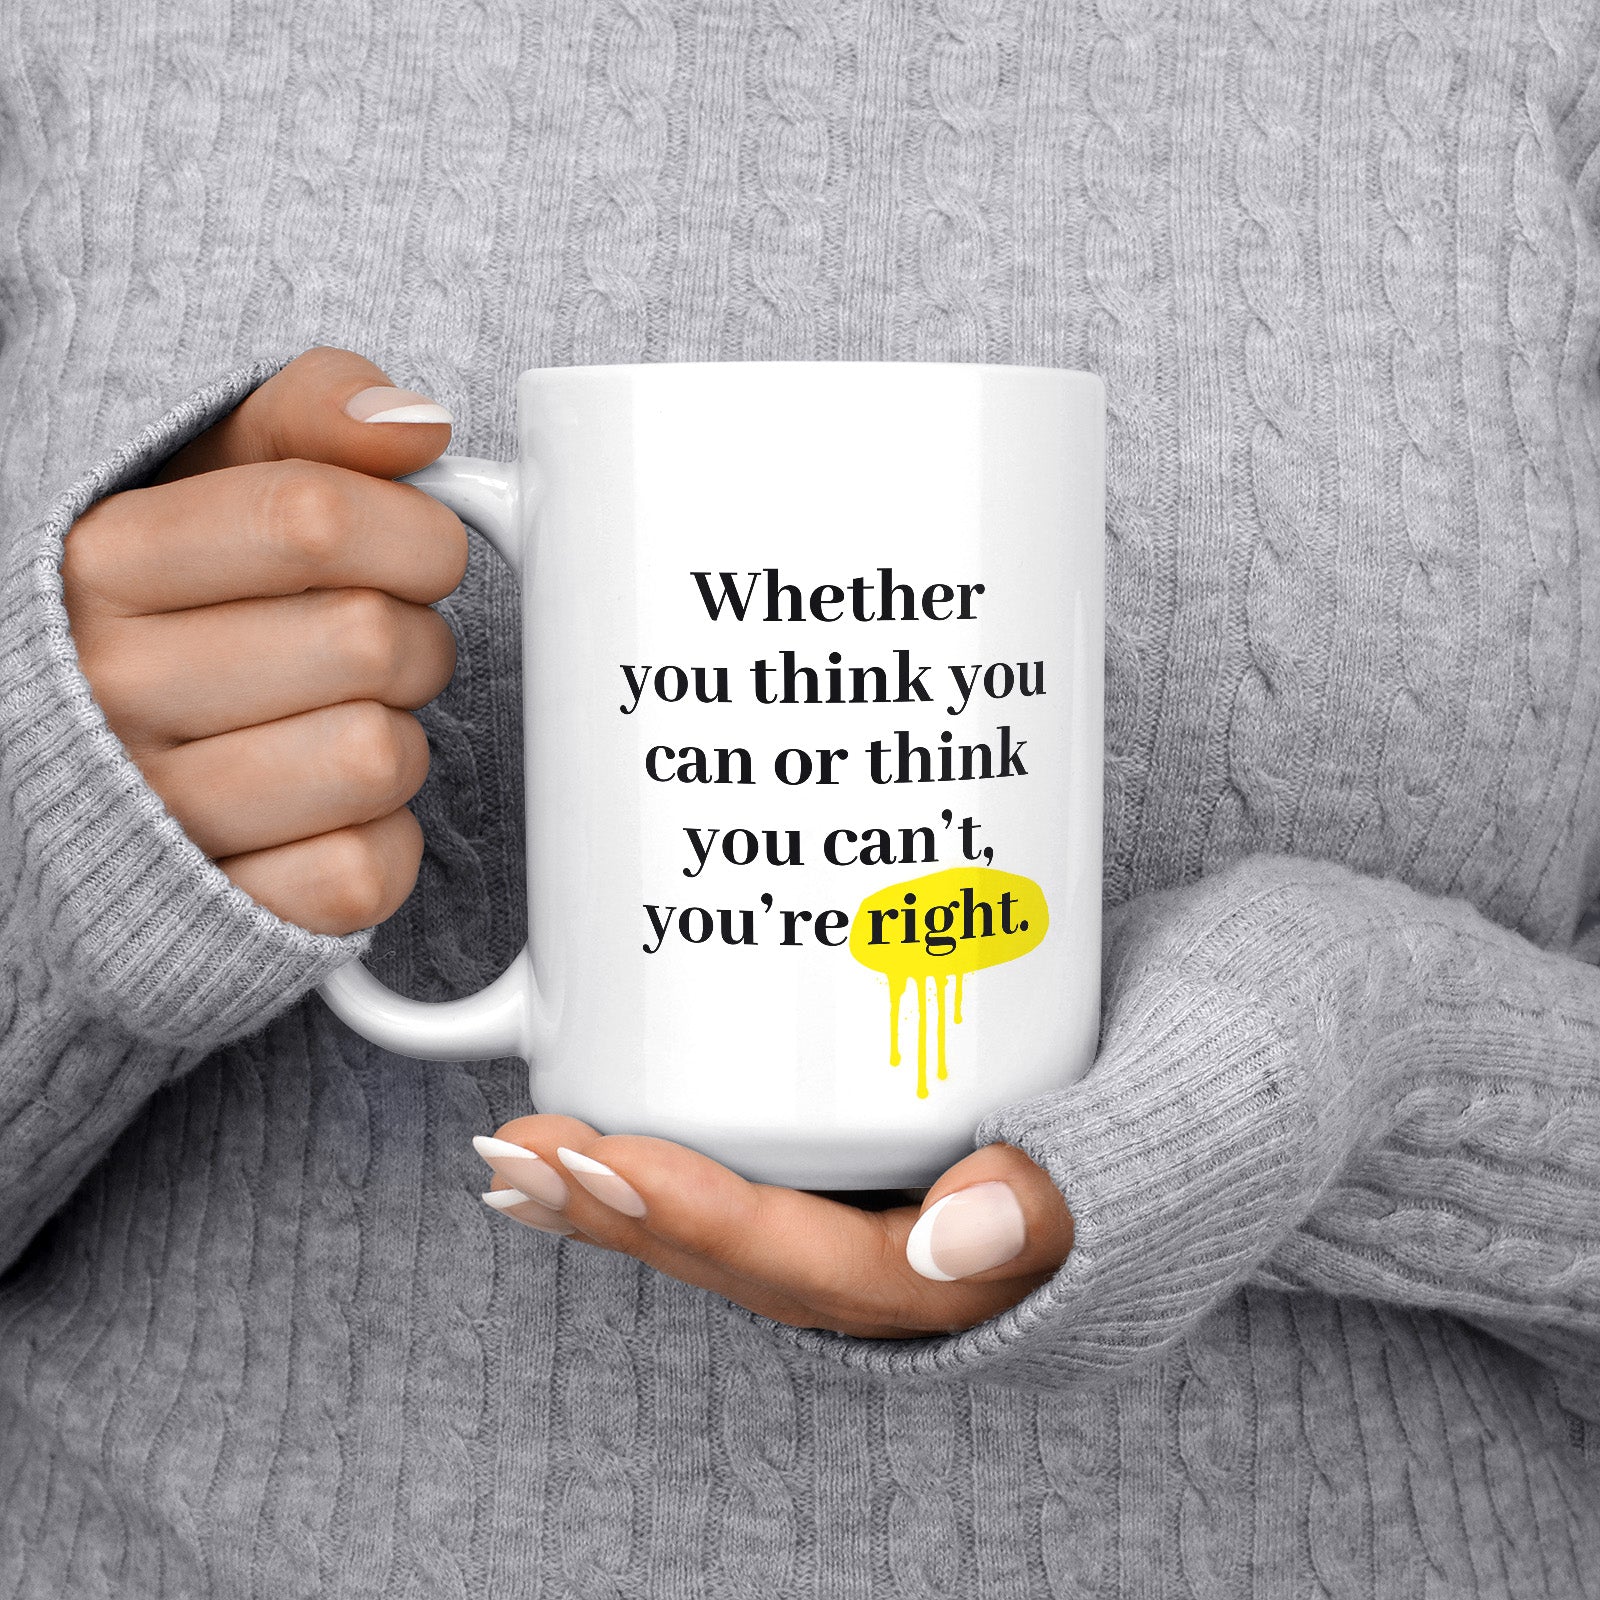 Be inspired by Henry Ford's famous quote, "Whether you think you can or think you can't, you're right" on this white and glossy 15oz coffee mug with the handle on the left.